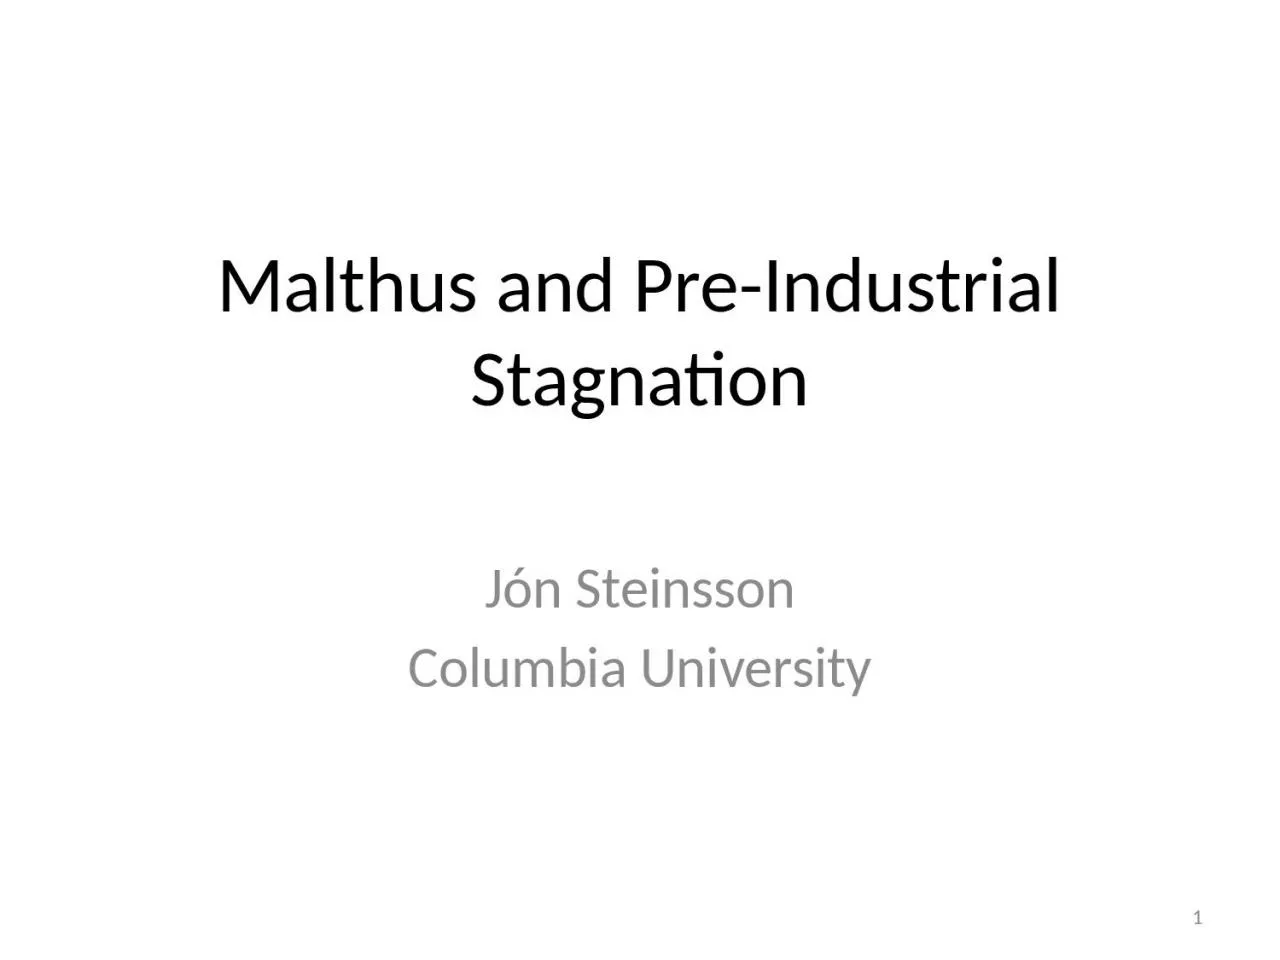 Malthus and Pre-Industrial Stagnation